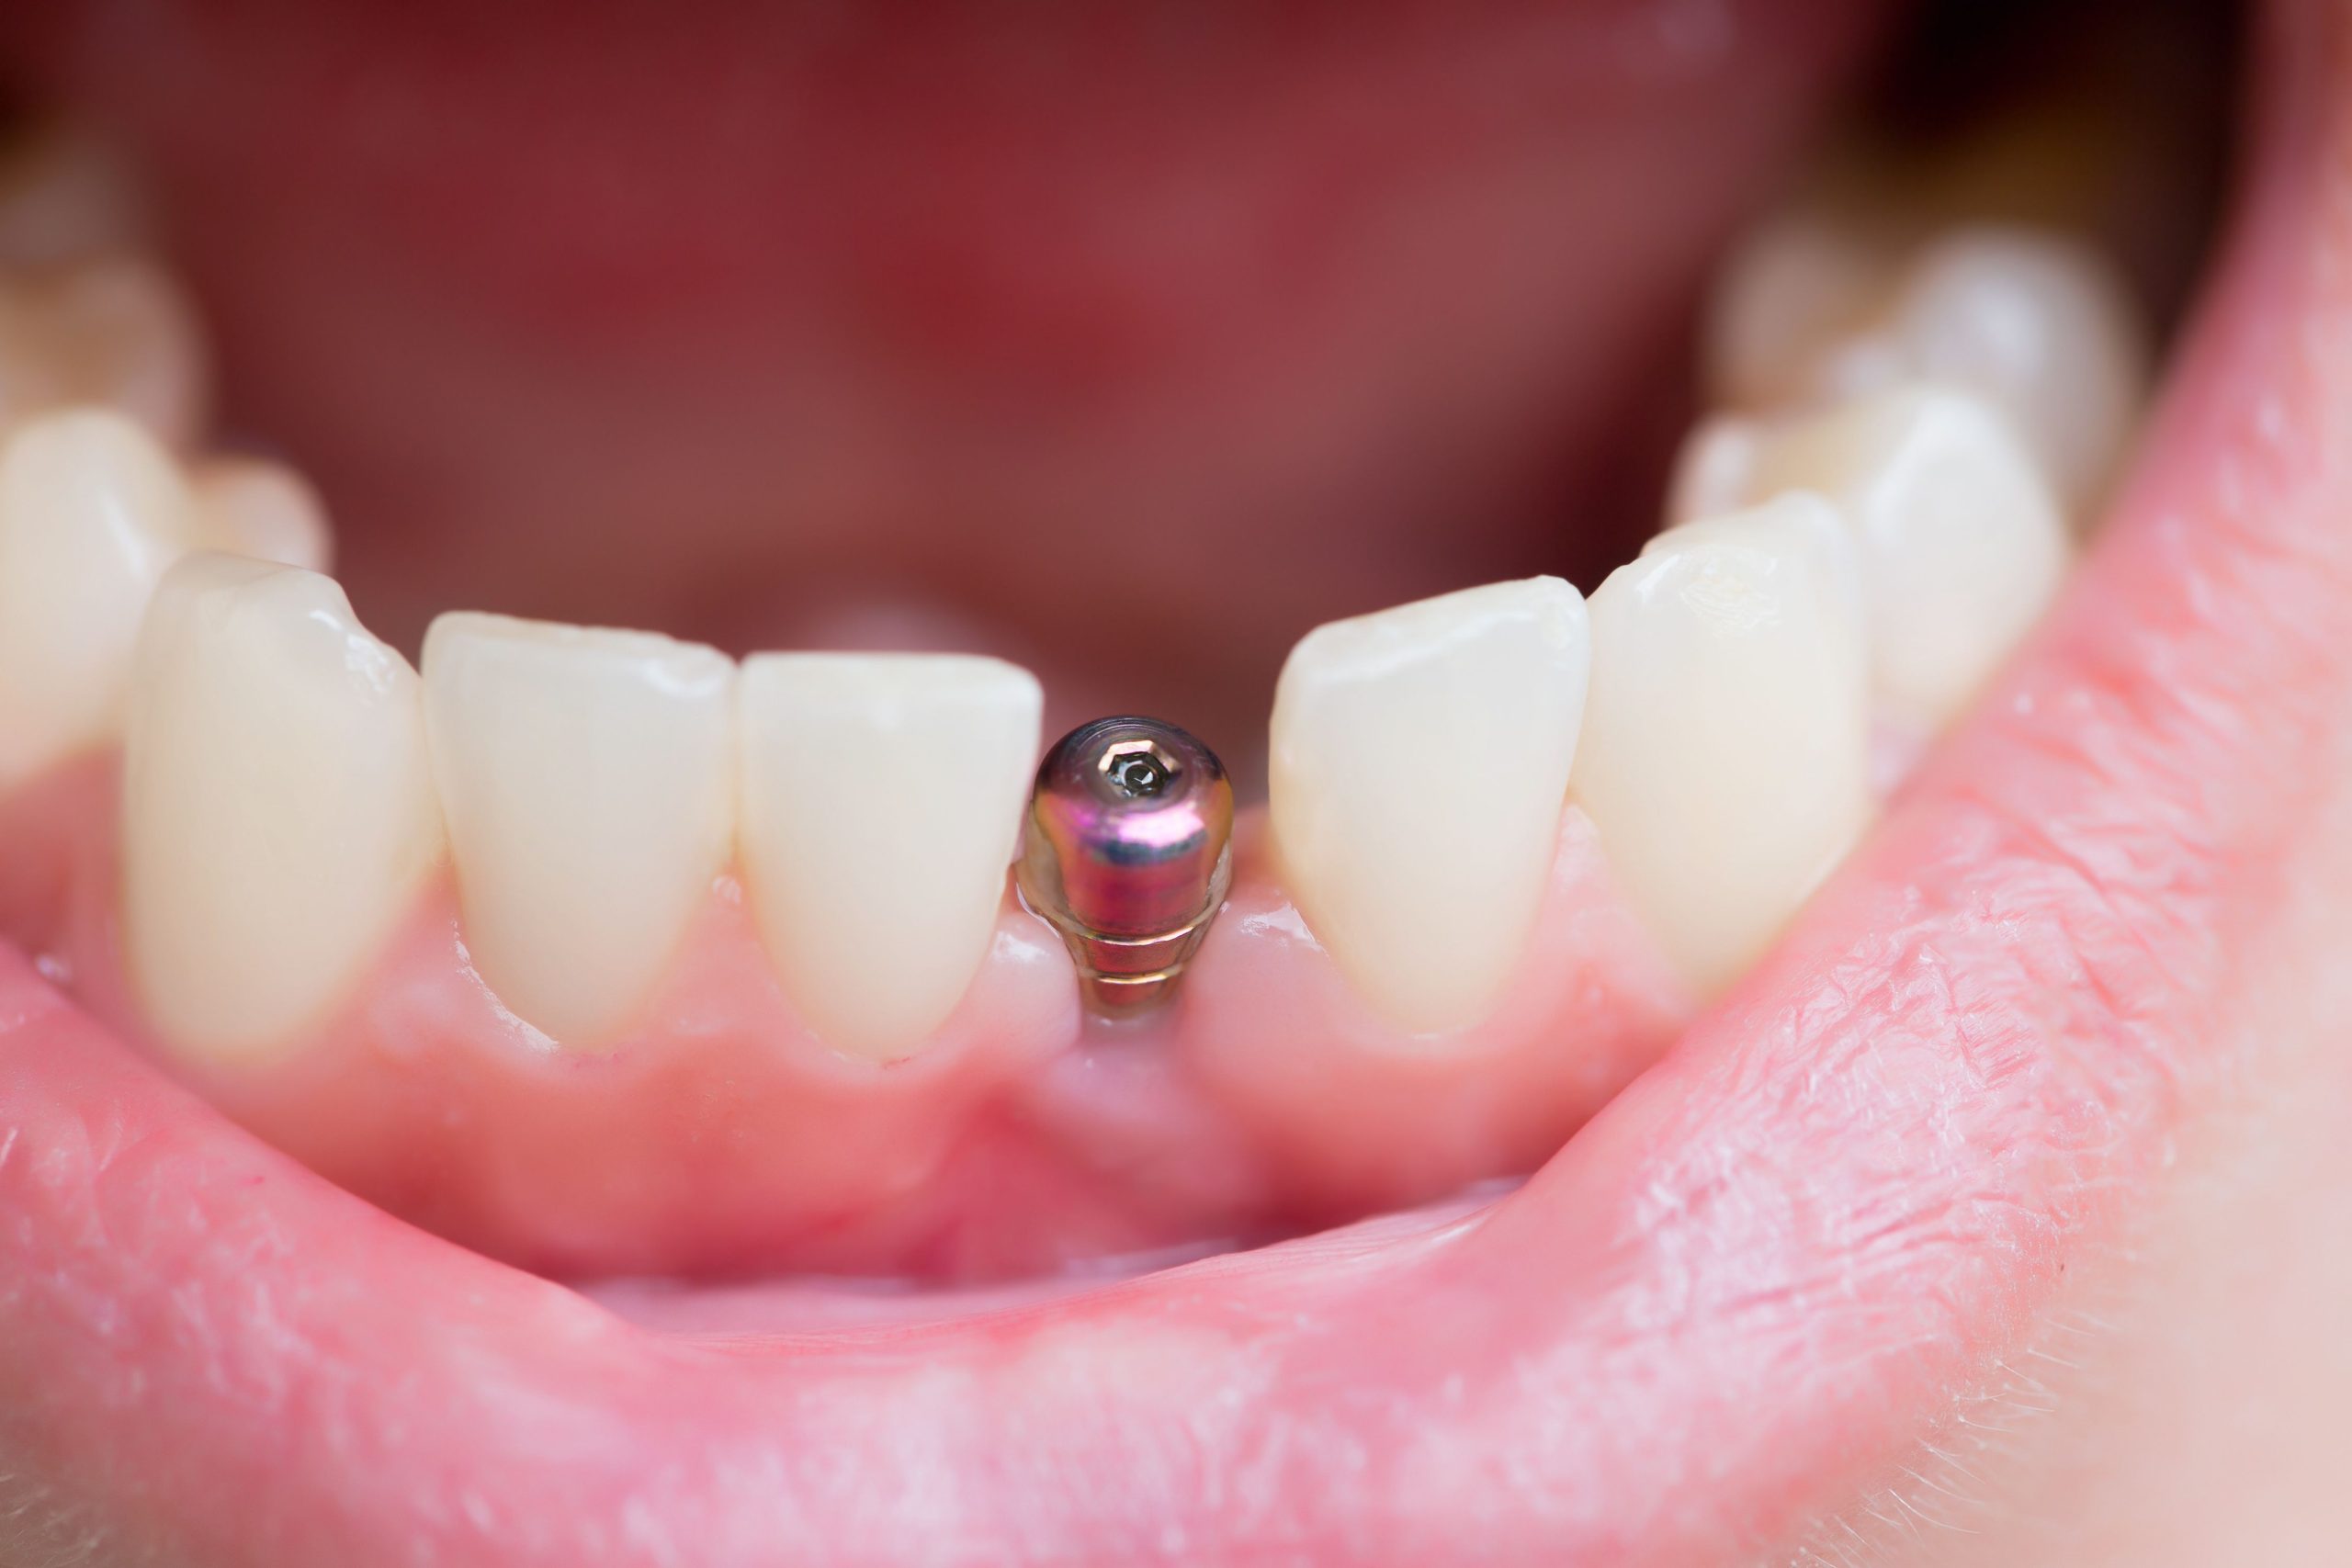 Front teeth dental implants provide a permanent and aesthetically pleasing solution for replacing missing front teeth.